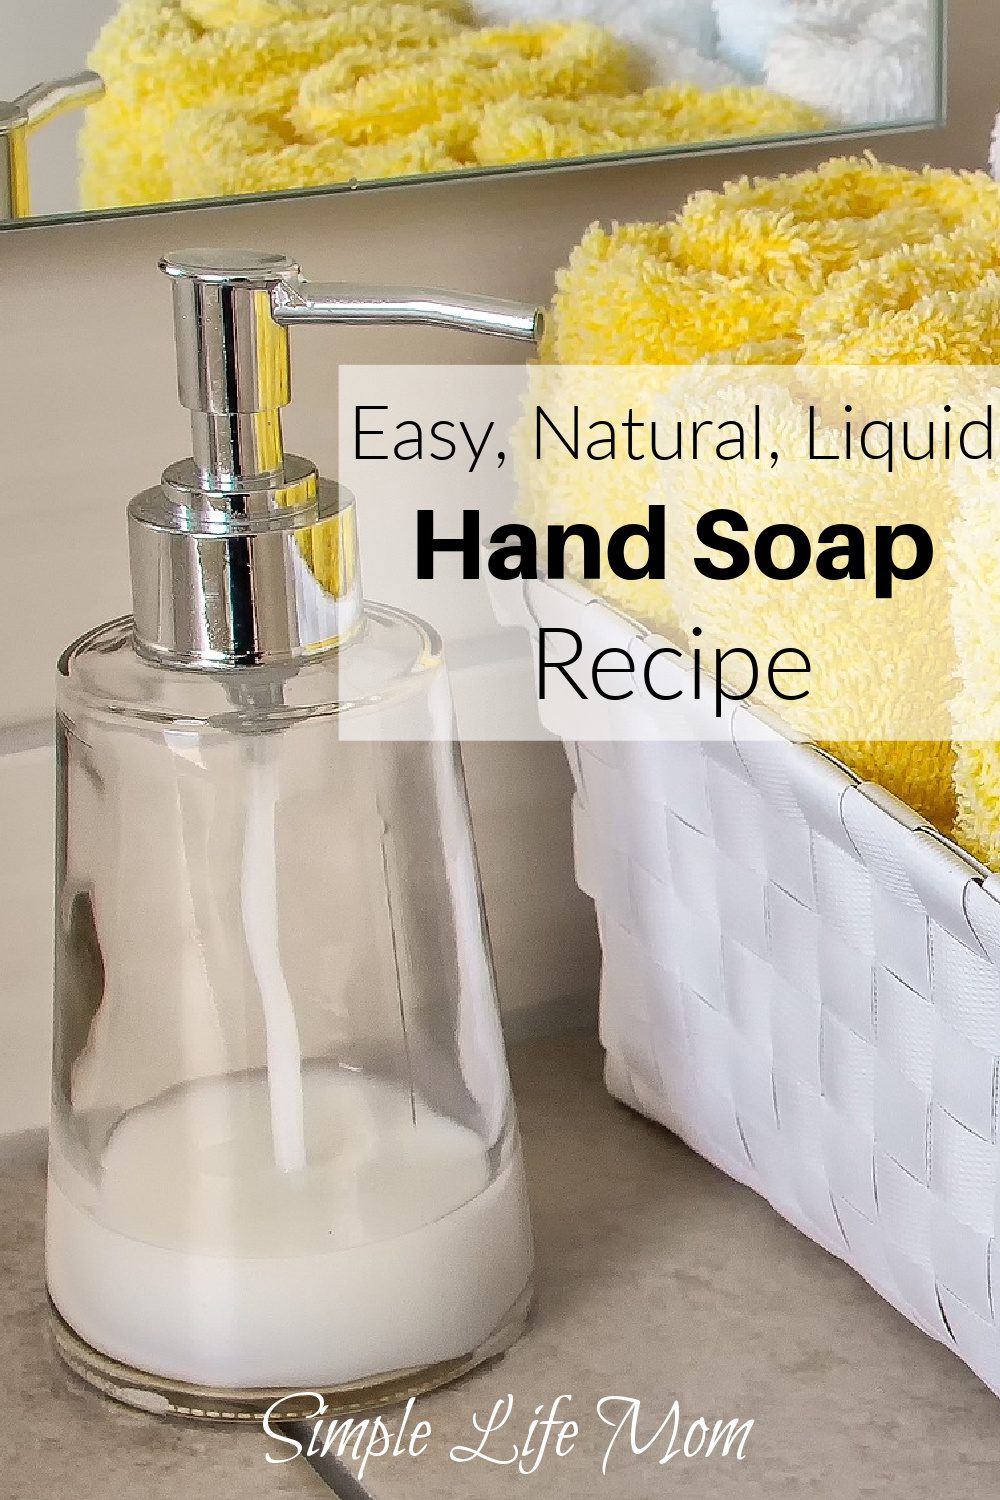 How to Make Luxury Foaming Liquid Hand Soap at Home - FeltMagnet